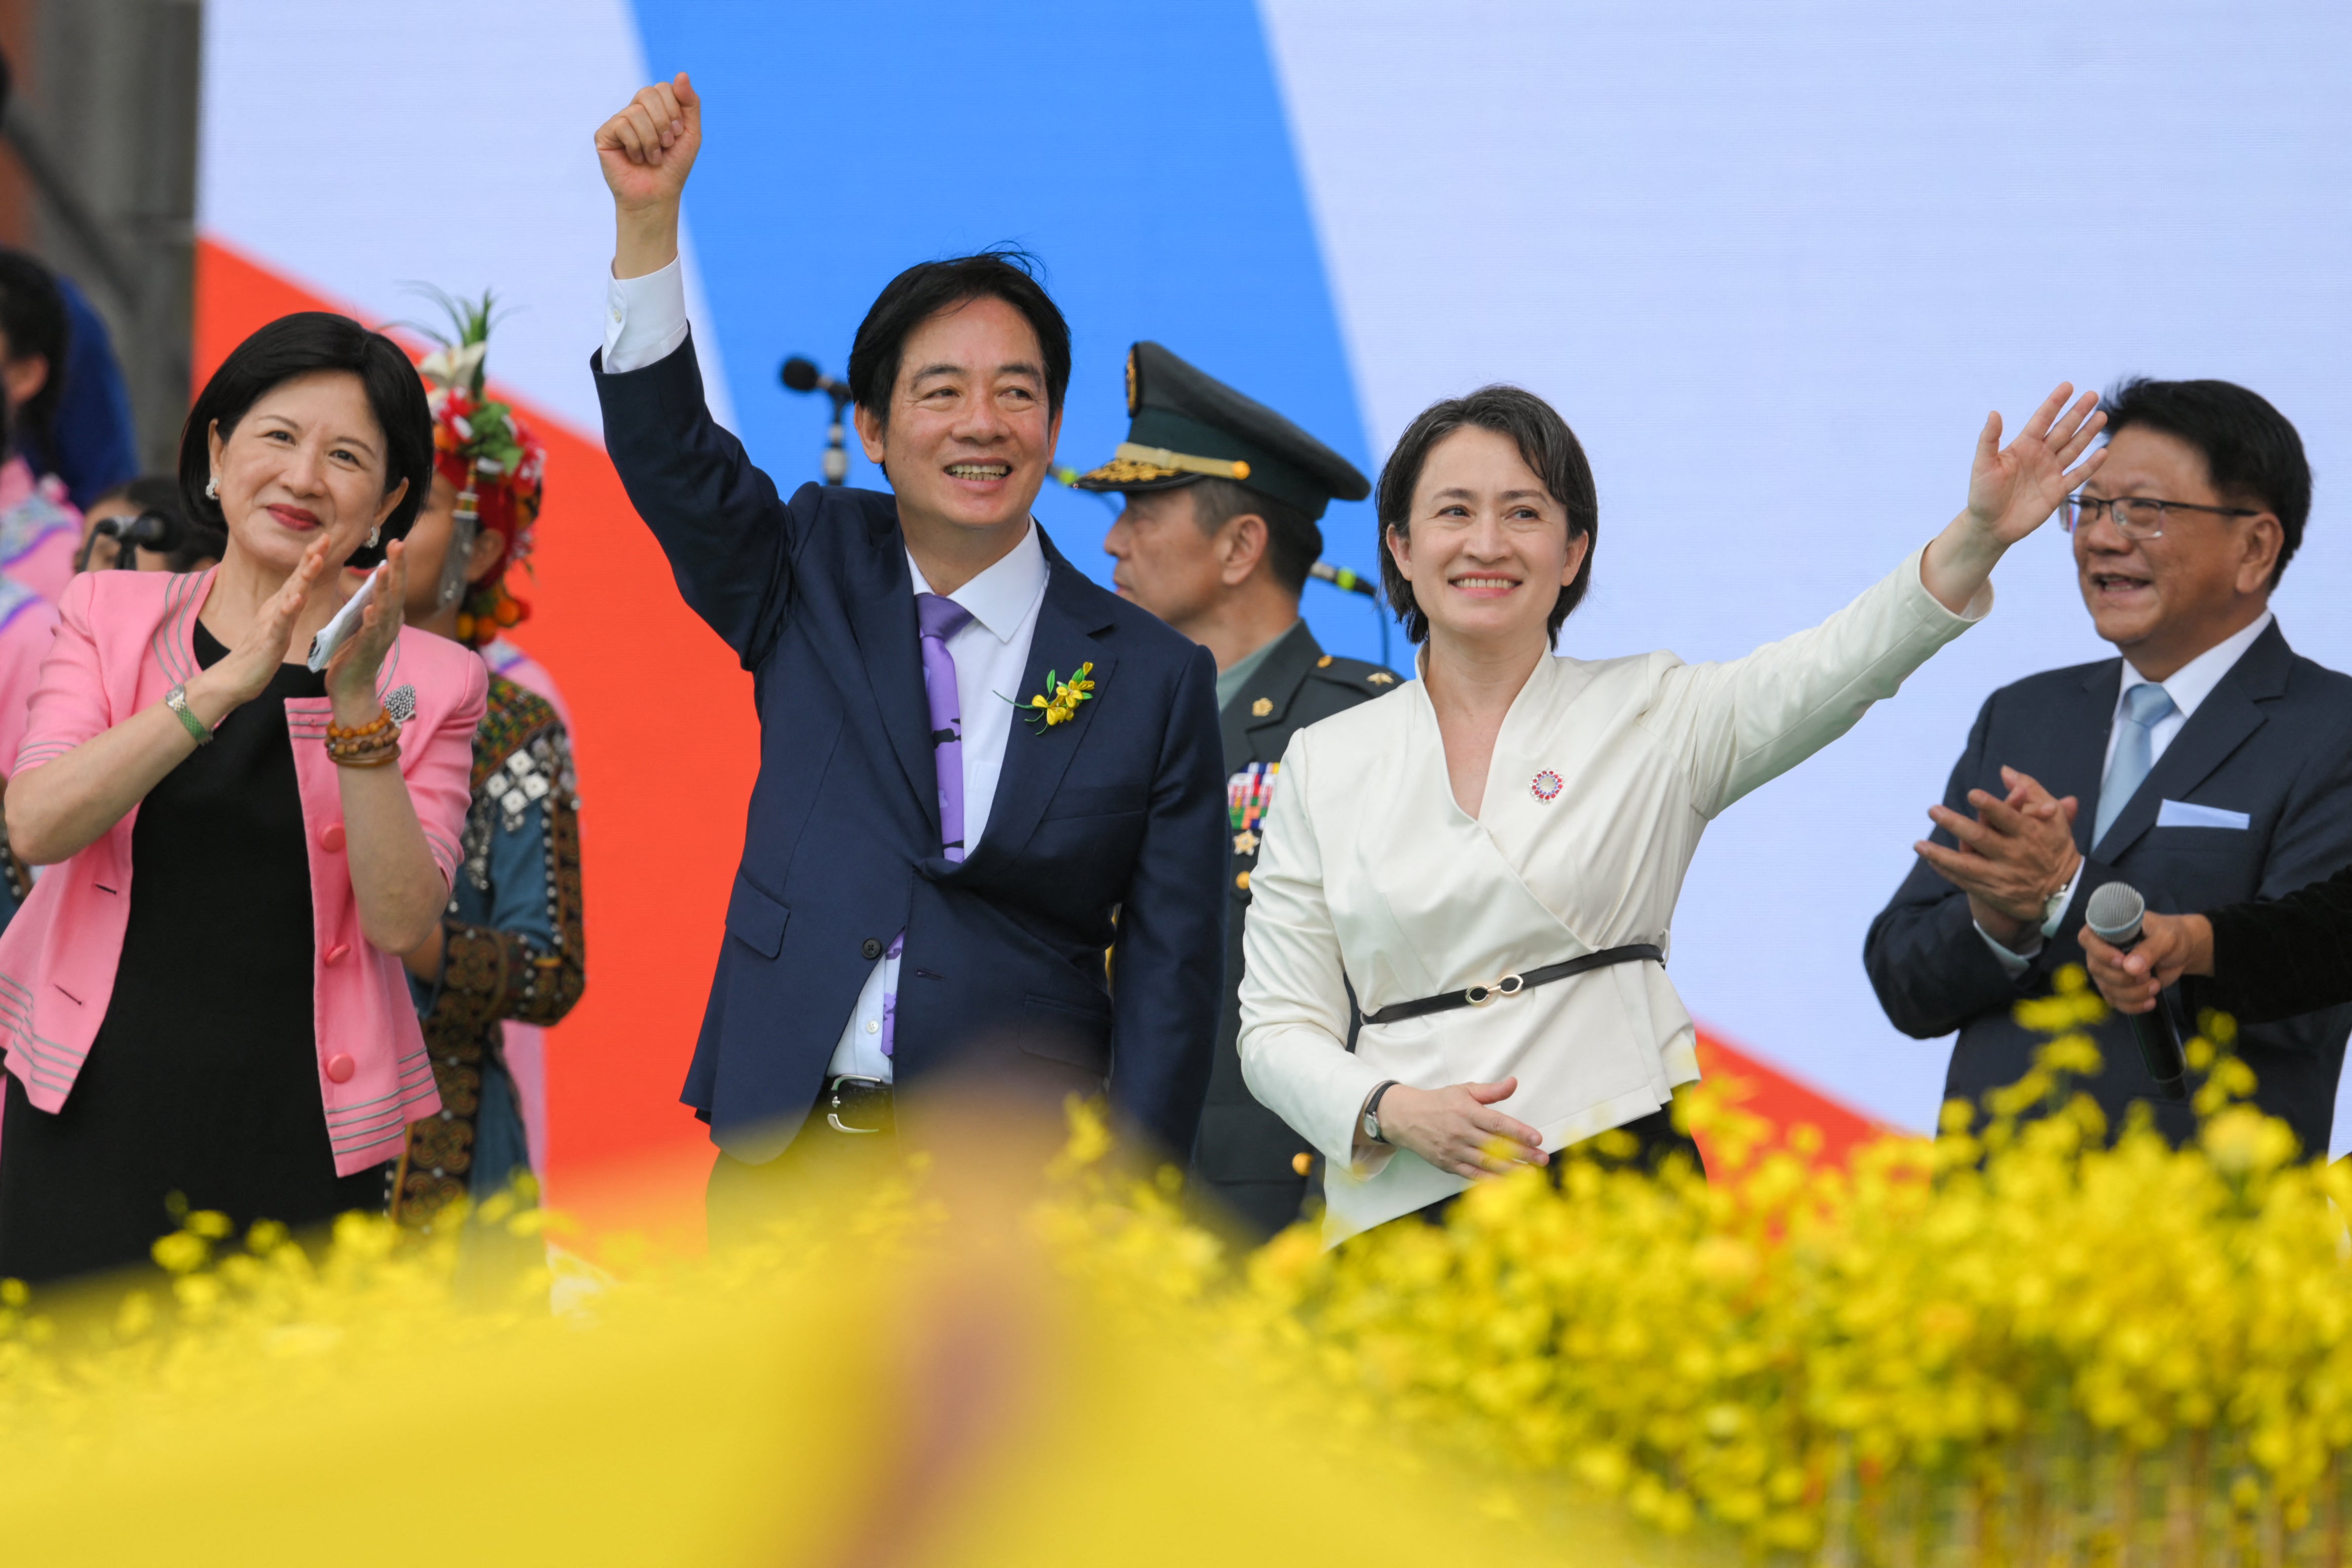 Lai Ching-te, incoming first lady Wu Mei-ju (left) and vice-president Hsiao Bi-khim after the president’s inaugural speech